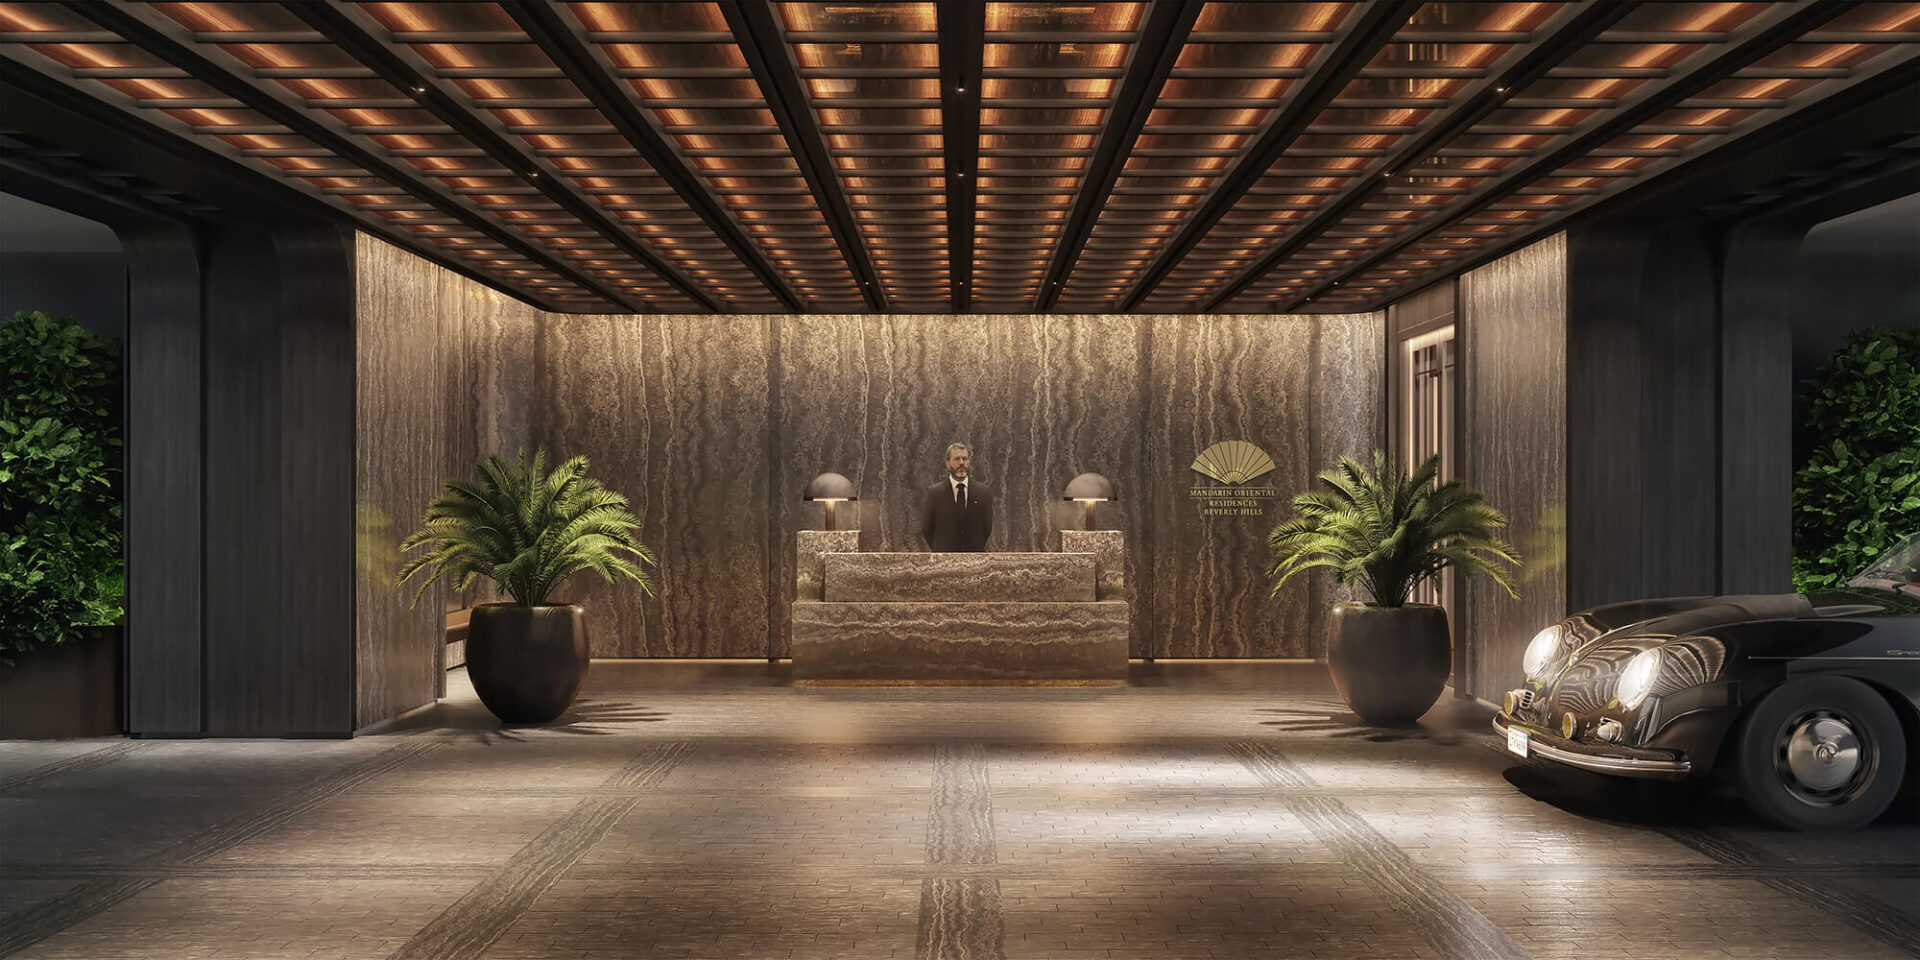 mandarin oriental beverly hills rendering of a valet car park and entrance to the building